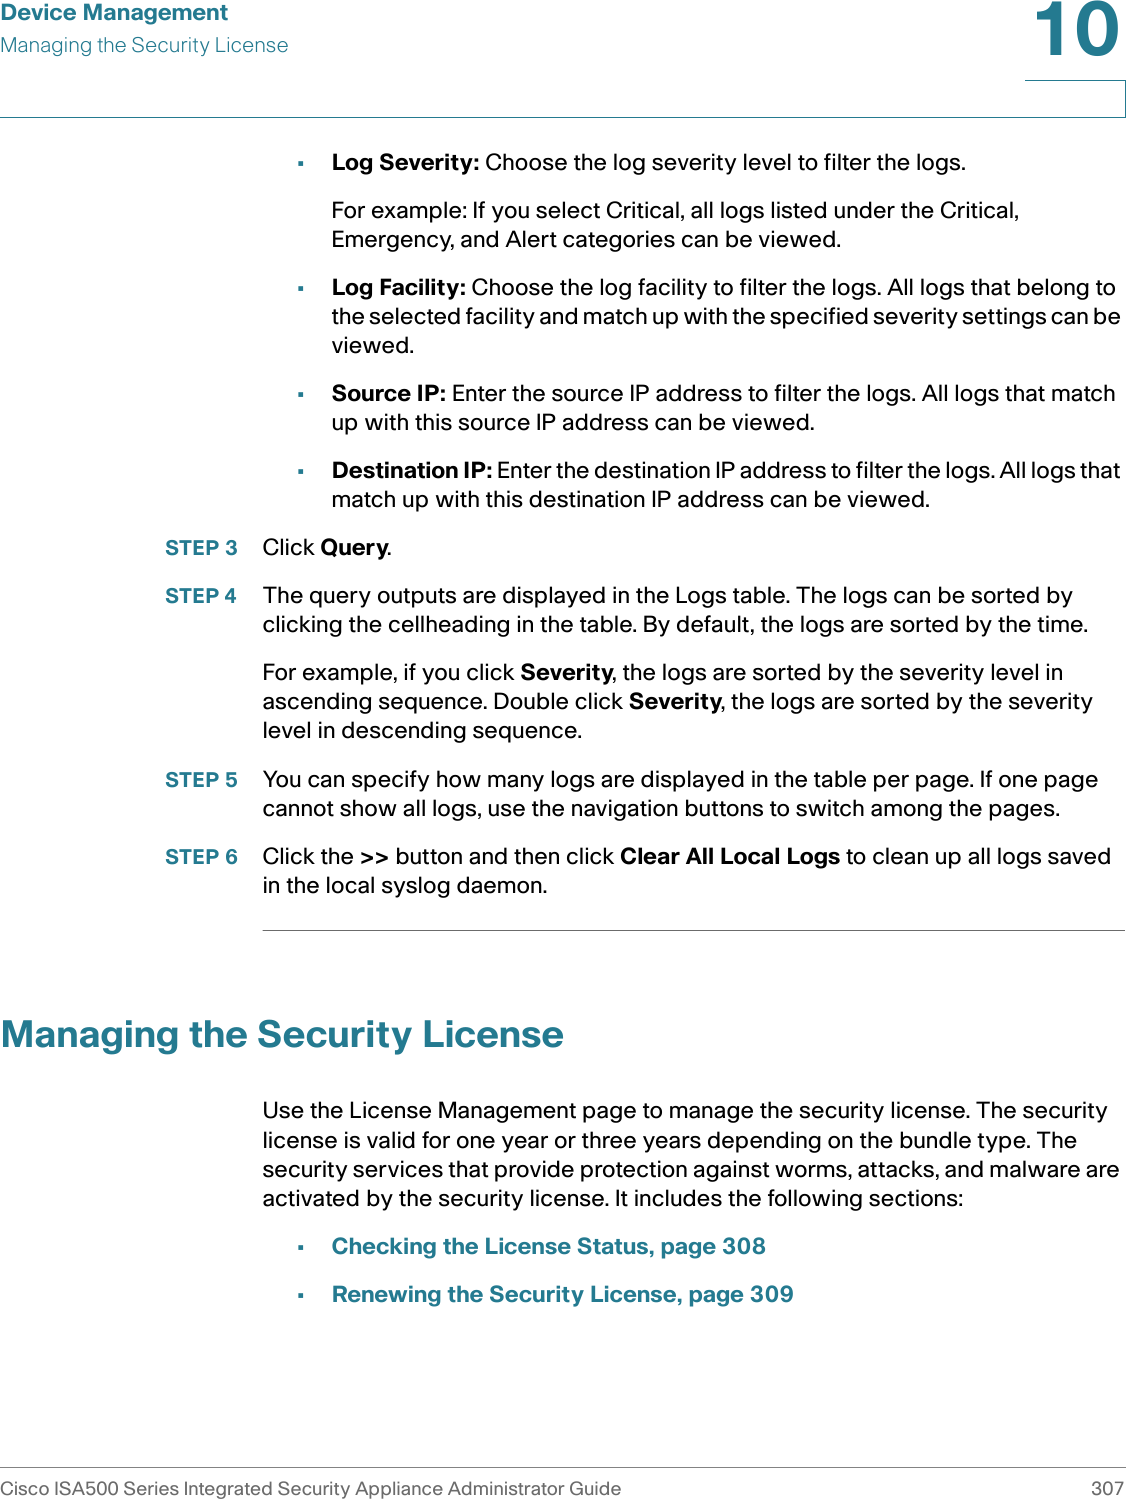 Device ManagementManaging the Security LicenseCisco ISA500 Series Integrated Security Appliance Administrator Guide 30710 •Log Severity: Choose the log severity level to filter the logs. For example: If you select Critical, all logs listed under the Critical, Emergency, and Alert categories can be viewed.•Log Facility: Choose the log facility to filter the logs. All logs that belong to the selected facility and match up with the specified severity settings can be viewed. •Source IP: Enter the source IP address to filter the logs. All logs that match up with this source IP address can be viewed. •Destination IP: Enter the destination IP address to filter the logs. All logs that match up with this destination IP address can be viewed. STEP 3 Click Query. STEP 4 The query outputs are displayed in the Logs table. The logs can be sorted by clicking the cellheading in the table. By default, the logs are sorted by the time. For example, if you click Severity, the logs are sorted by the severity level in ascending sequence. Double click Severity, the logs are sorted by the severity level in descending sequence. STEP 5 You can specify how many logs are displayed in the table per page. If one page cannot show all logs, use the navigation buttons to switch among the pages. STEP 6 Click the &gt;&gt; button and then click Clear All Local Logs to clean up all logs saved in the local syslog daemon. Managing the Security LicenseUse the License Management page to manage the security license. The security license is valid for one year or three years depending on the bundle type. The security services that provide protection against worms, attacks, and malware are activated by the security license. It includes the following sections: •Checking the License Status, page 308•Renewing the Security License, page 309